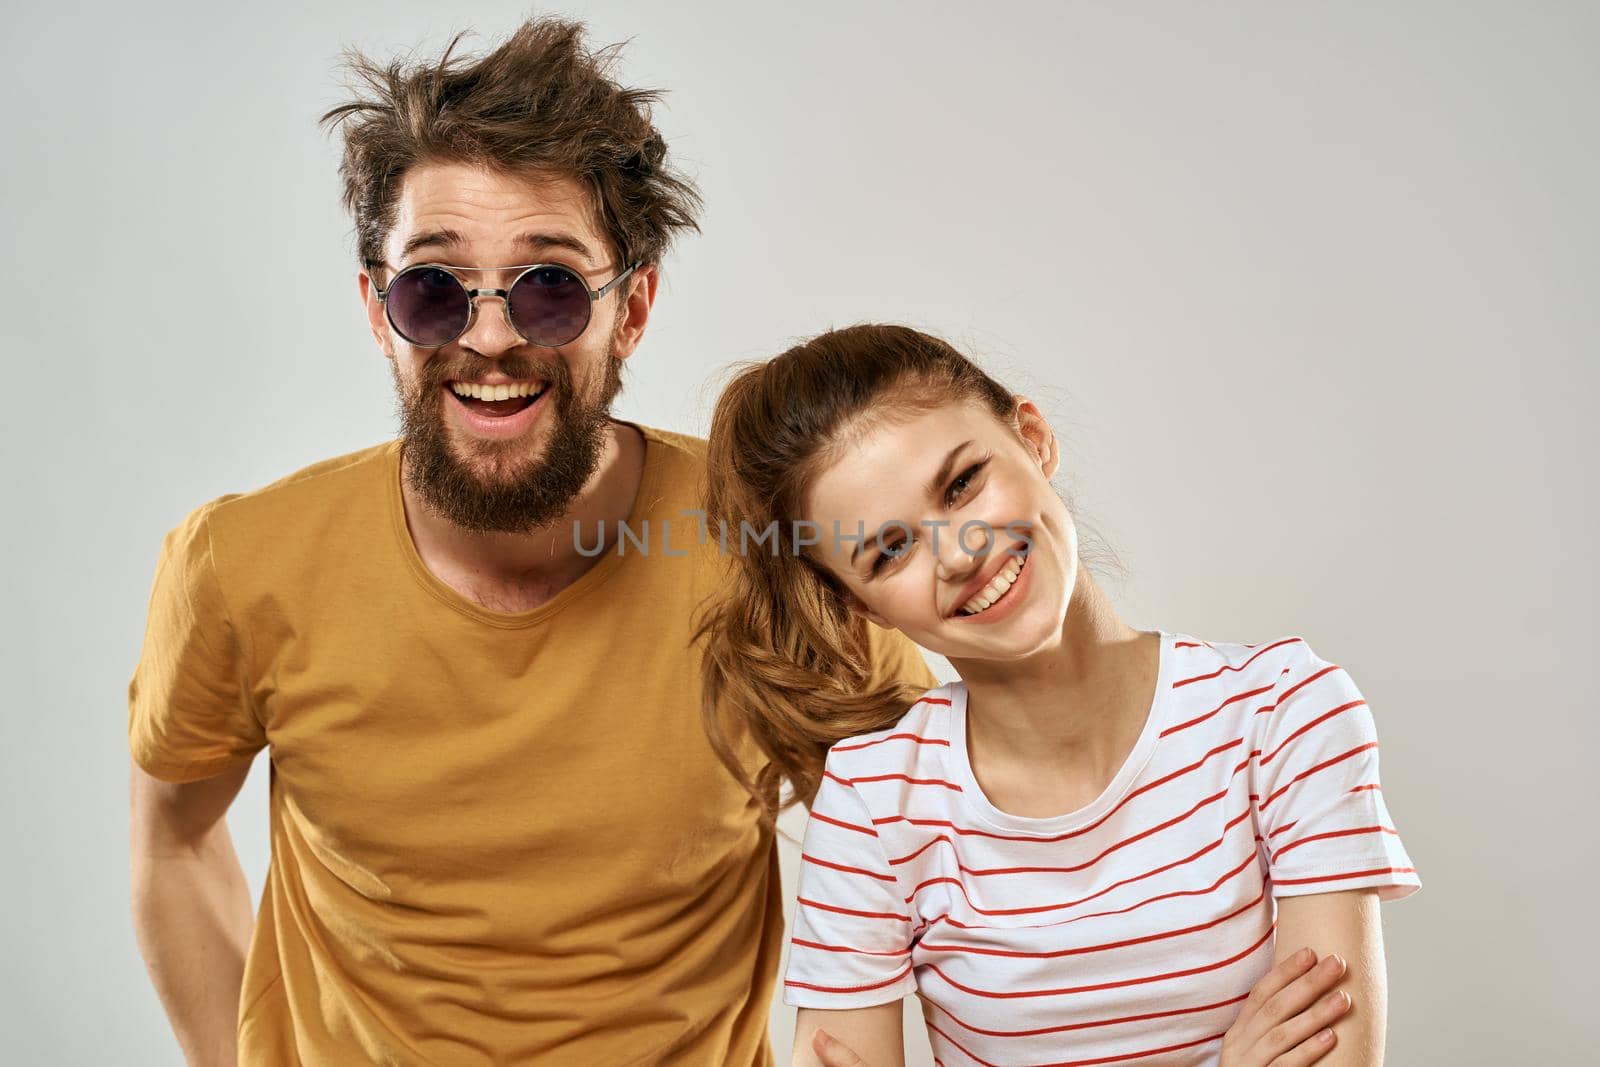 Man in sunglasses next to woman in communication fun friendship lifestyle. High quality photo